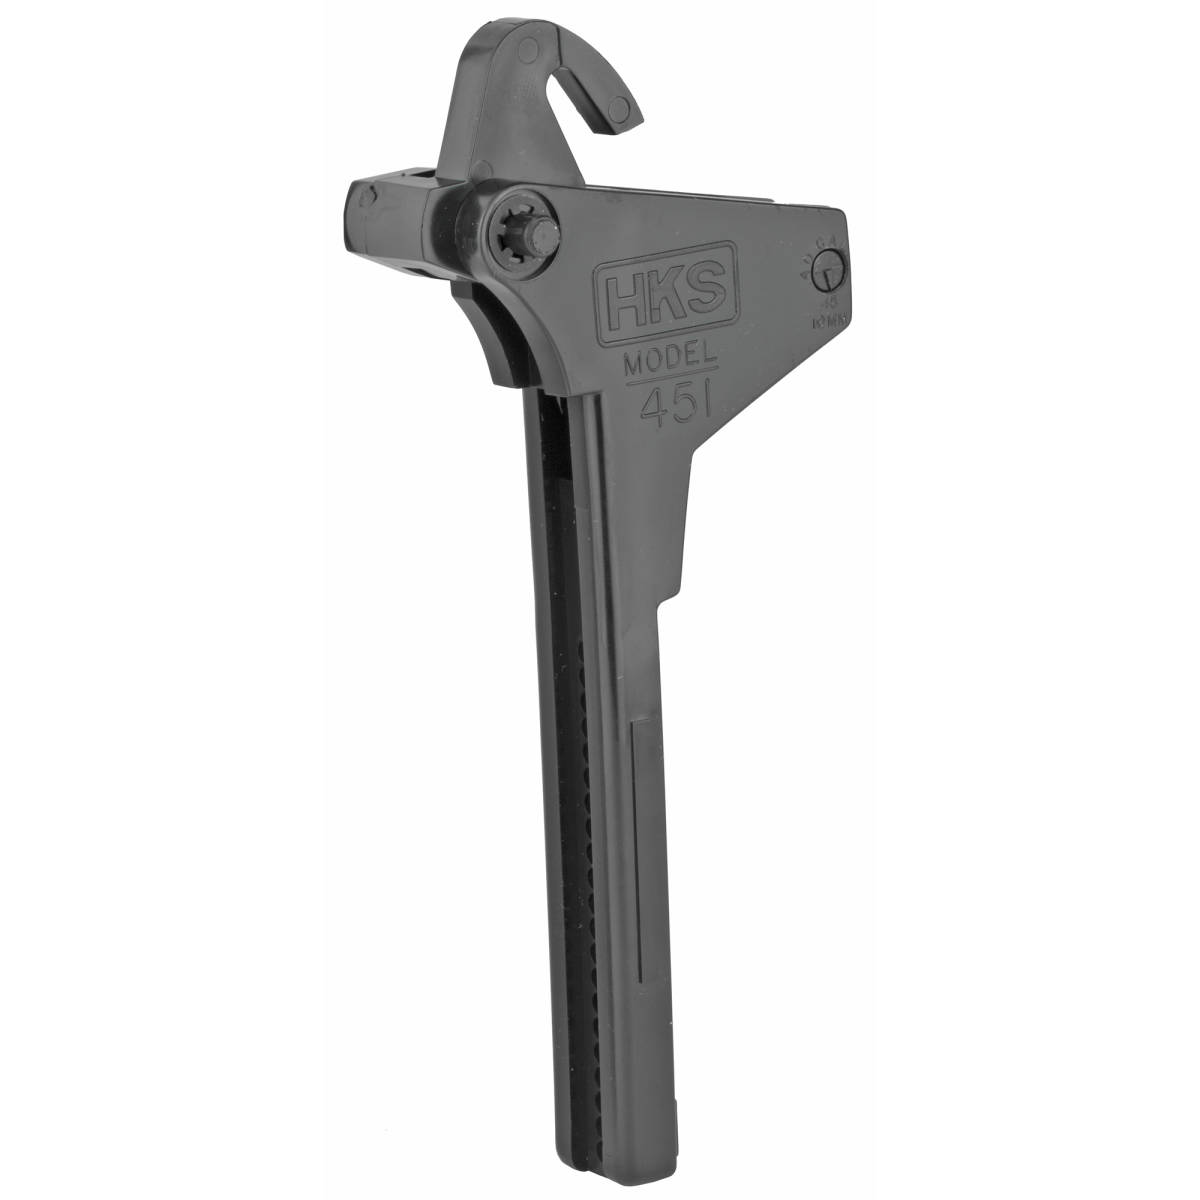 HKS 451 Single Stack Mag Loader Adjustable Style made of Plastic with...-img-0